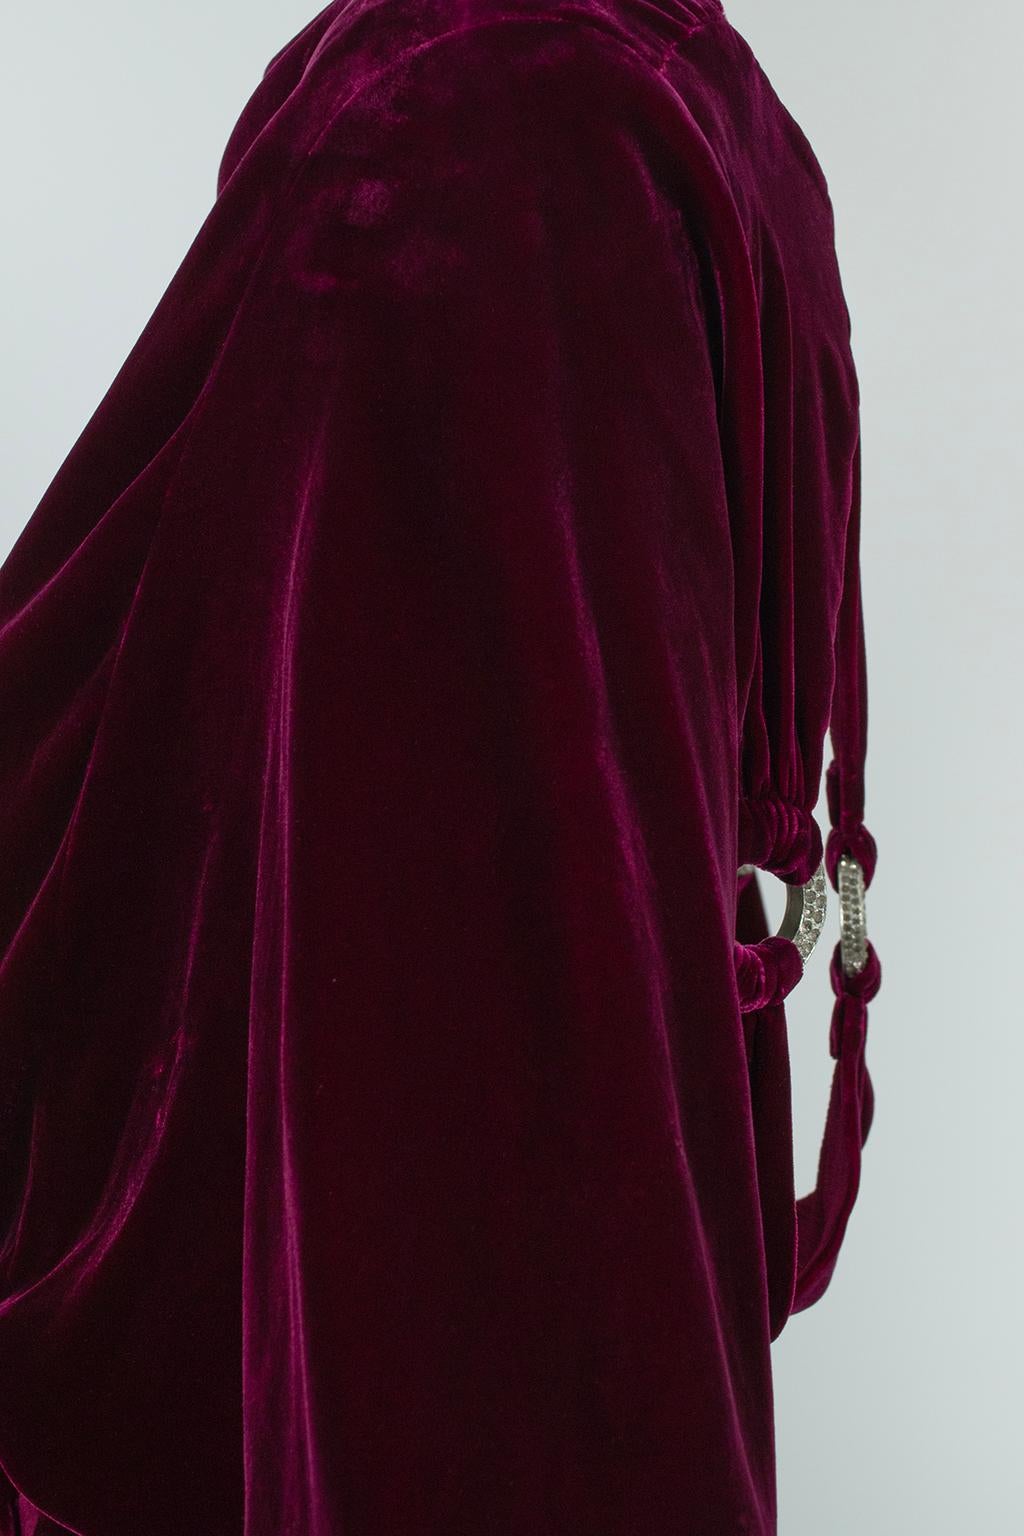 Regency Burgundy Silk Velvet Jeweled Cutout Back Bias Gown with Train – M, 1930s For Sale 6